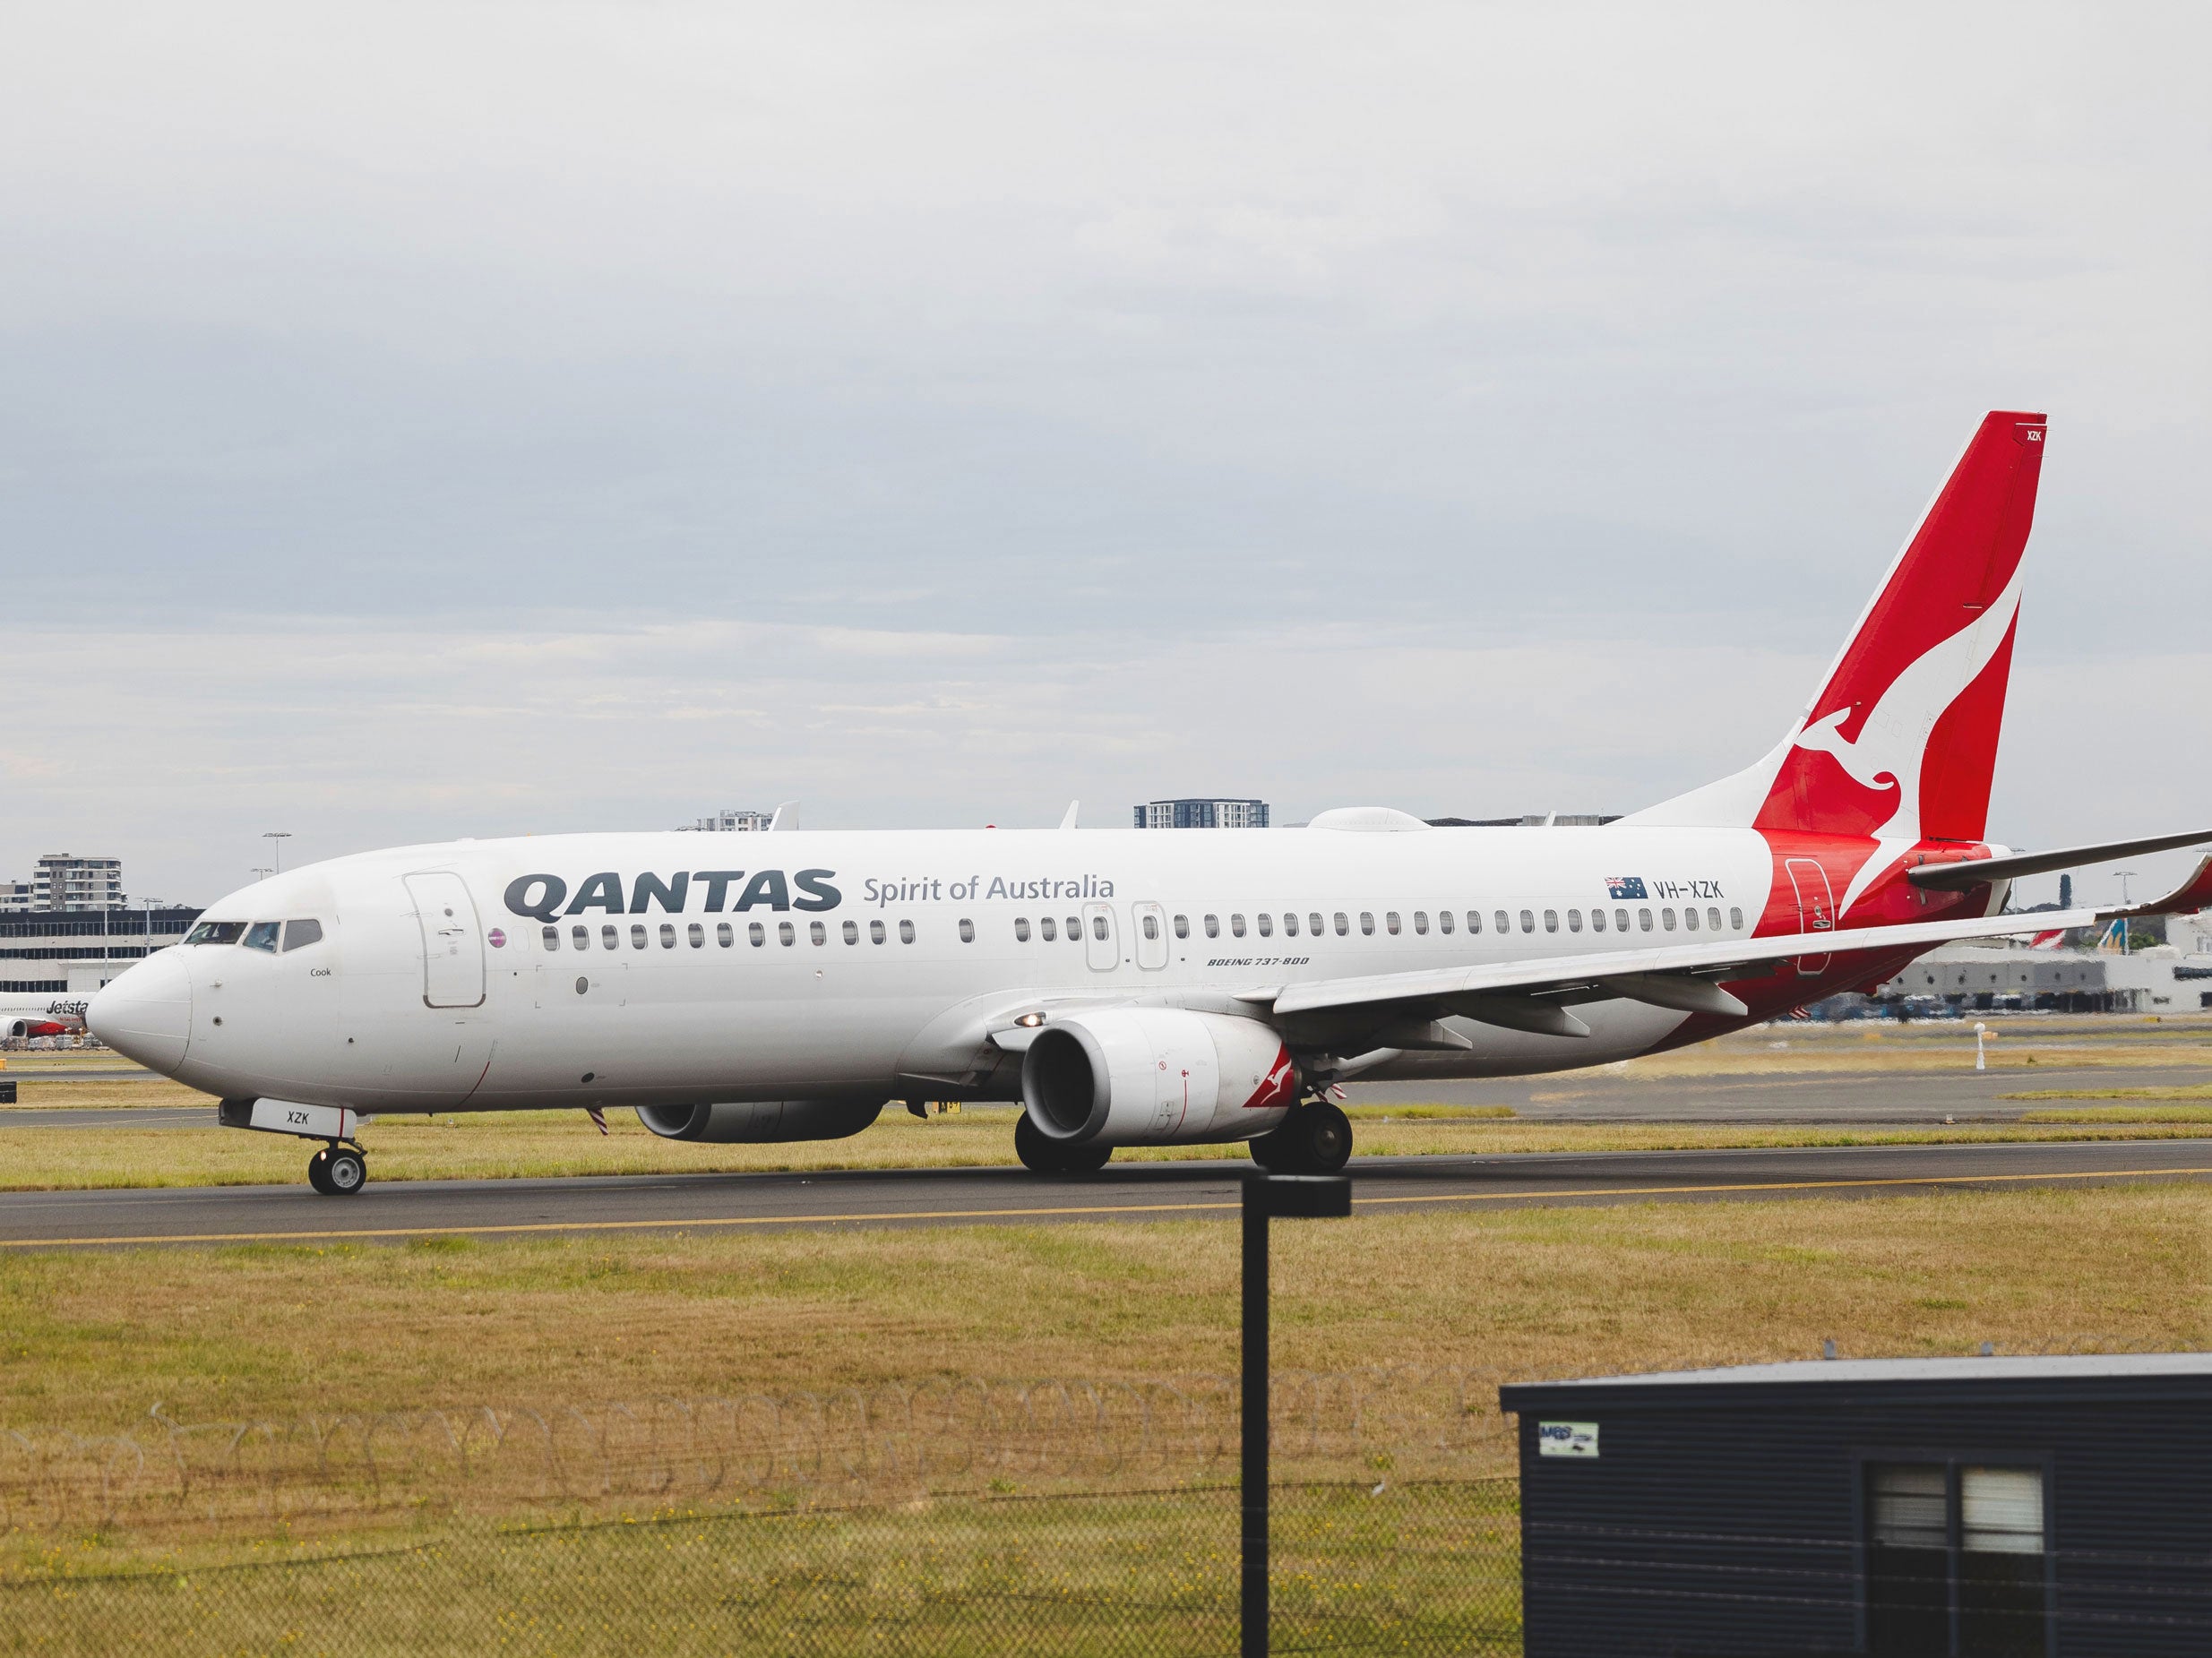 ACCC brings Qantas back down to ground for allegedly advertising cancelled flights